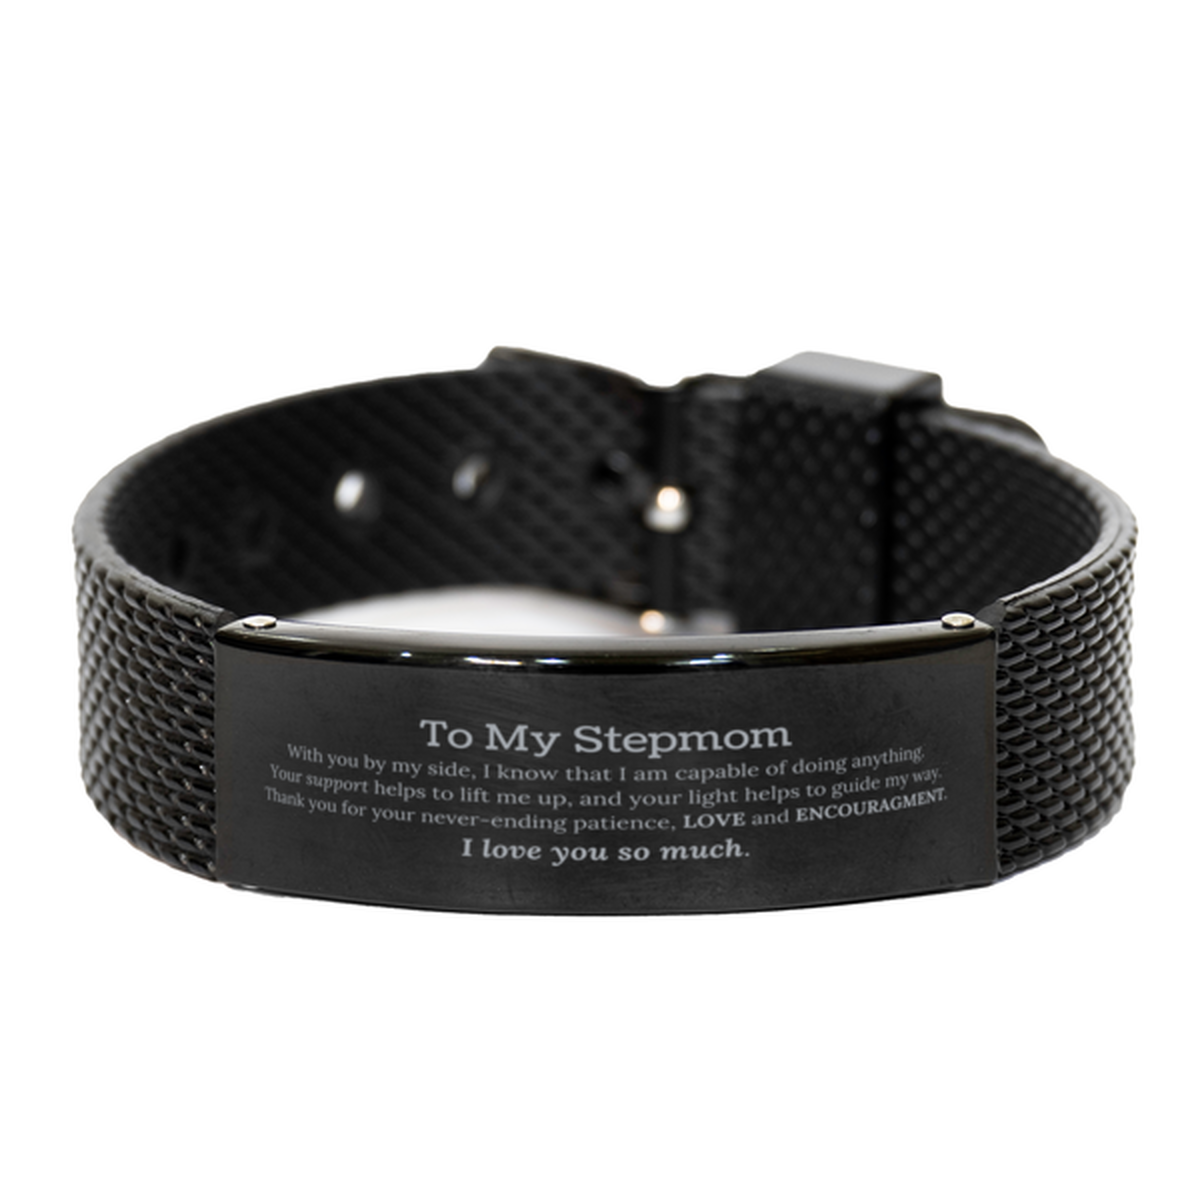 Appreciation Stepmom Black Shark Mesh Bracelet Gifts, To My Stepmom Birthday Christmas Wedding Keepsake Gifts for Stepmom With you by my side, I know that I am capable of doing anything. I love you so much